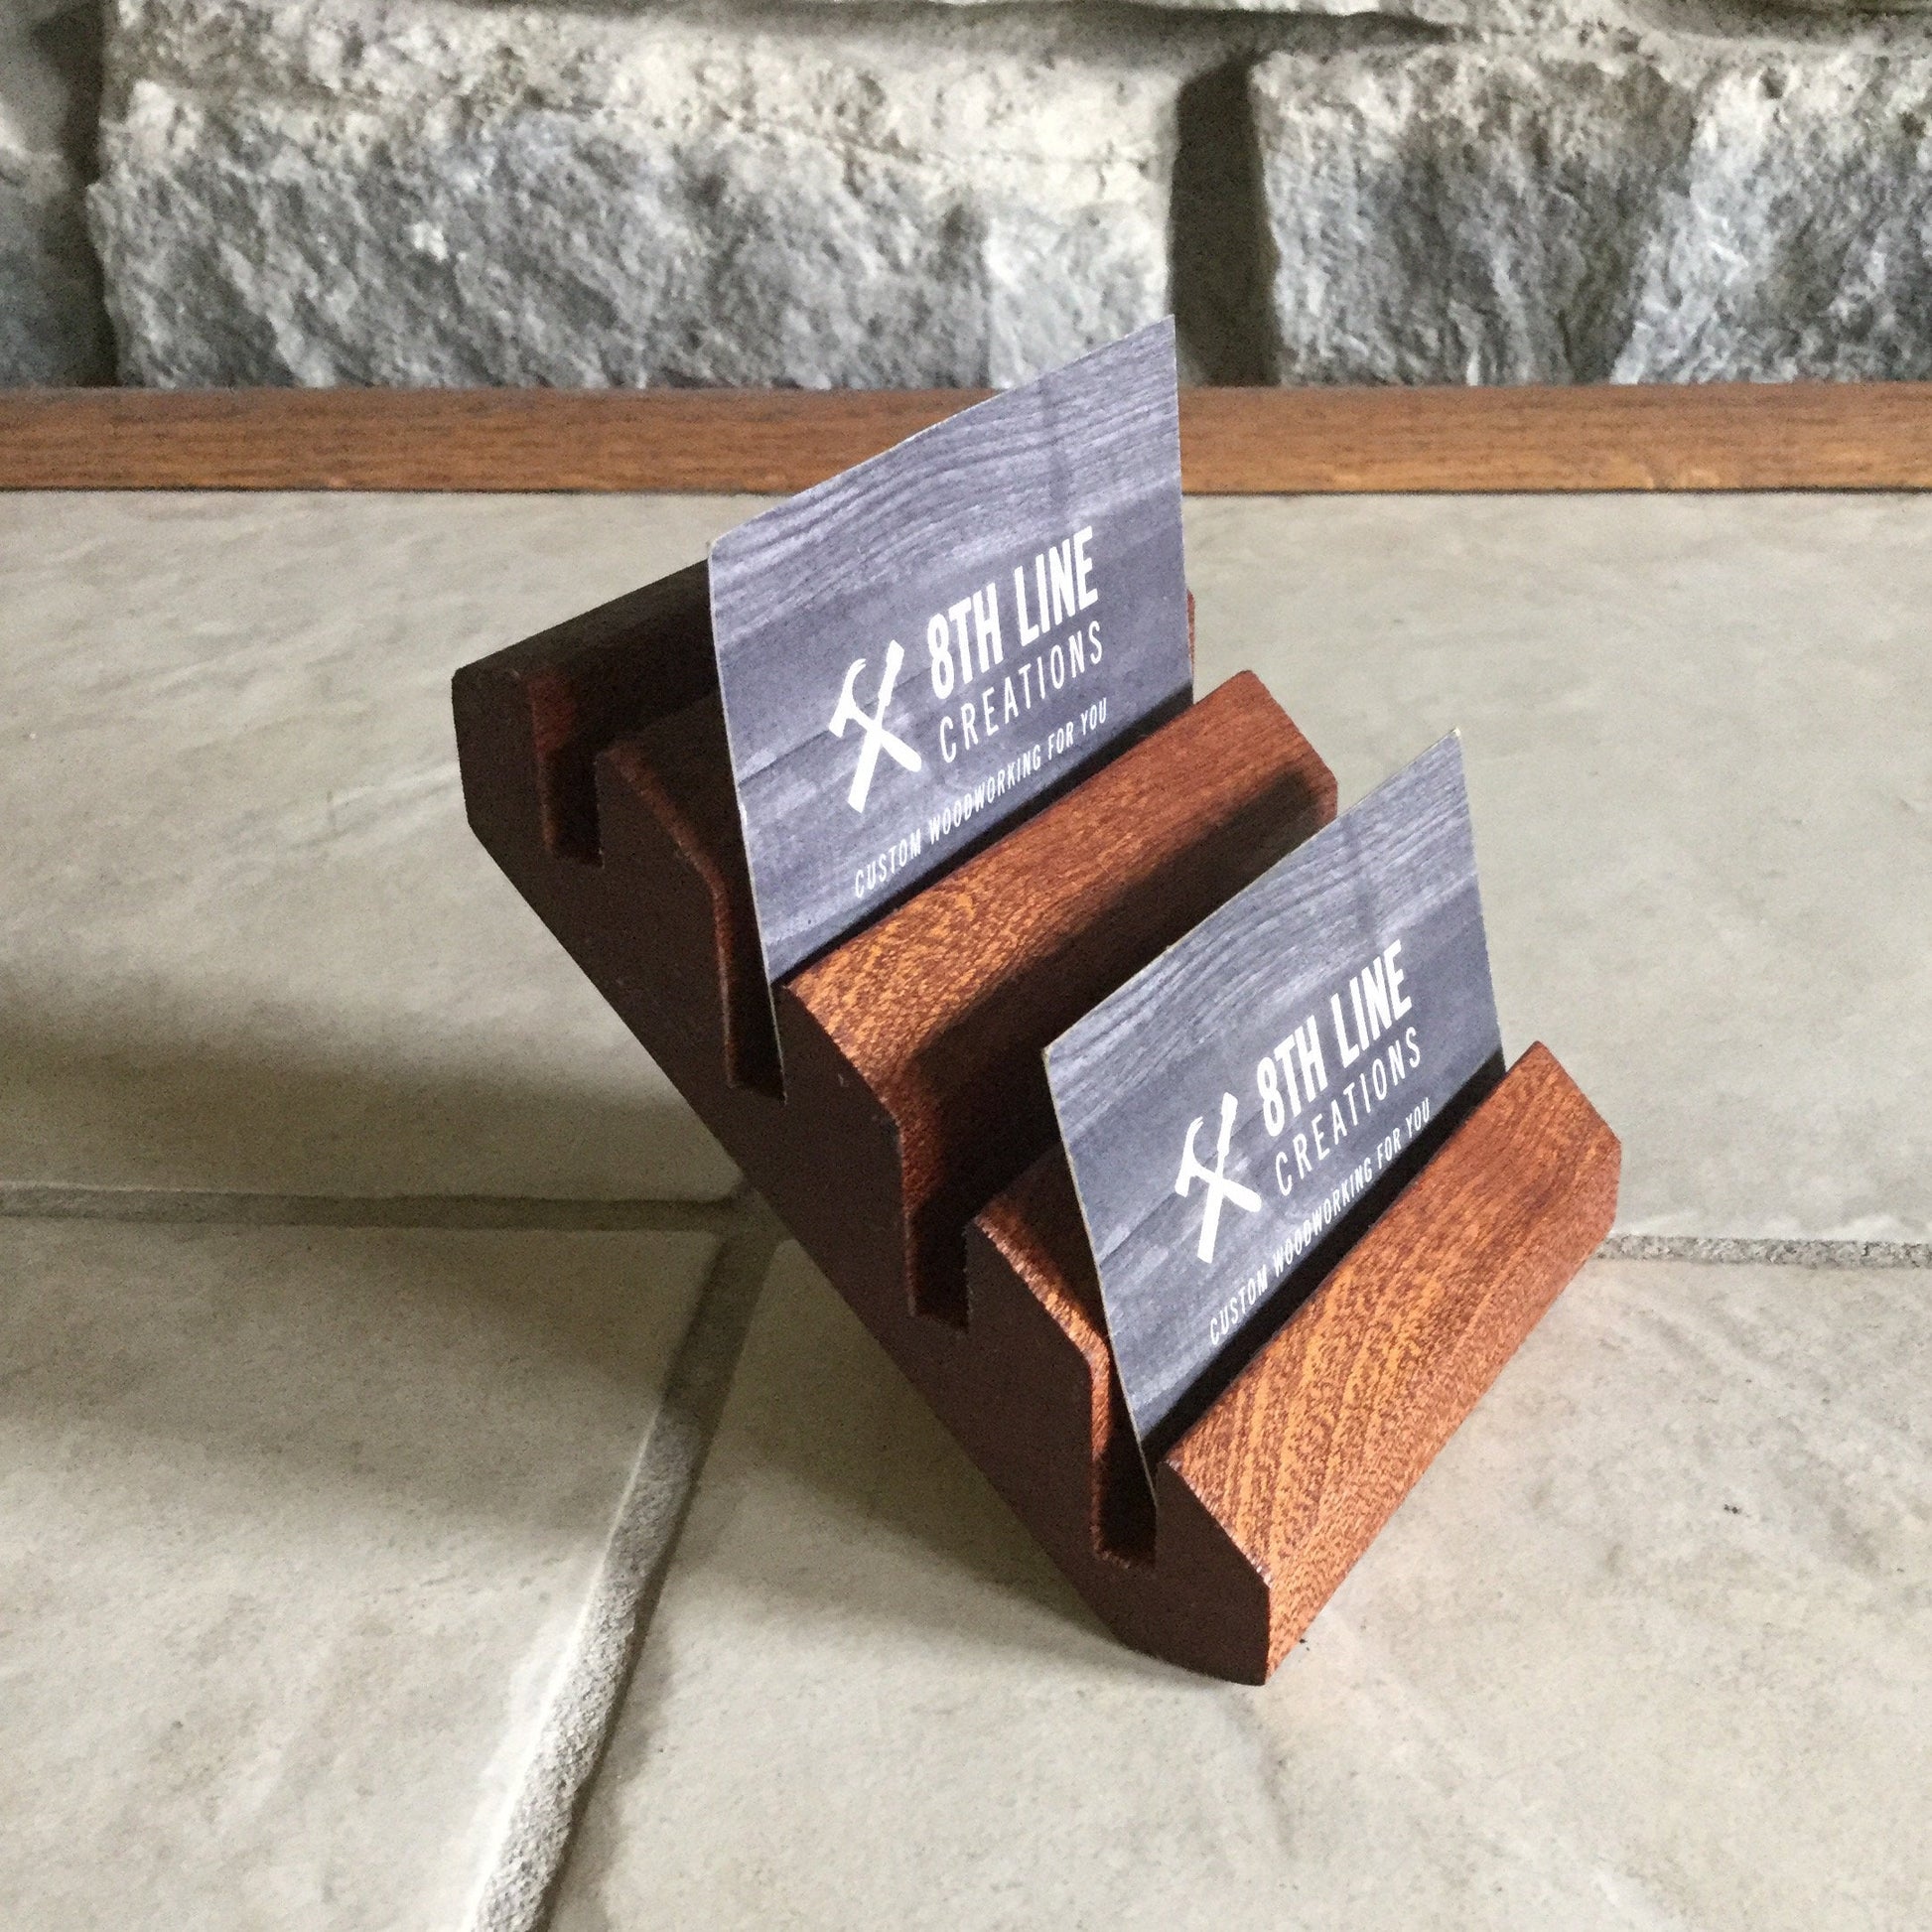 4 Card Business Card Holder - Sapele (Mahogany) Business Card Holders 8th Line Creations 